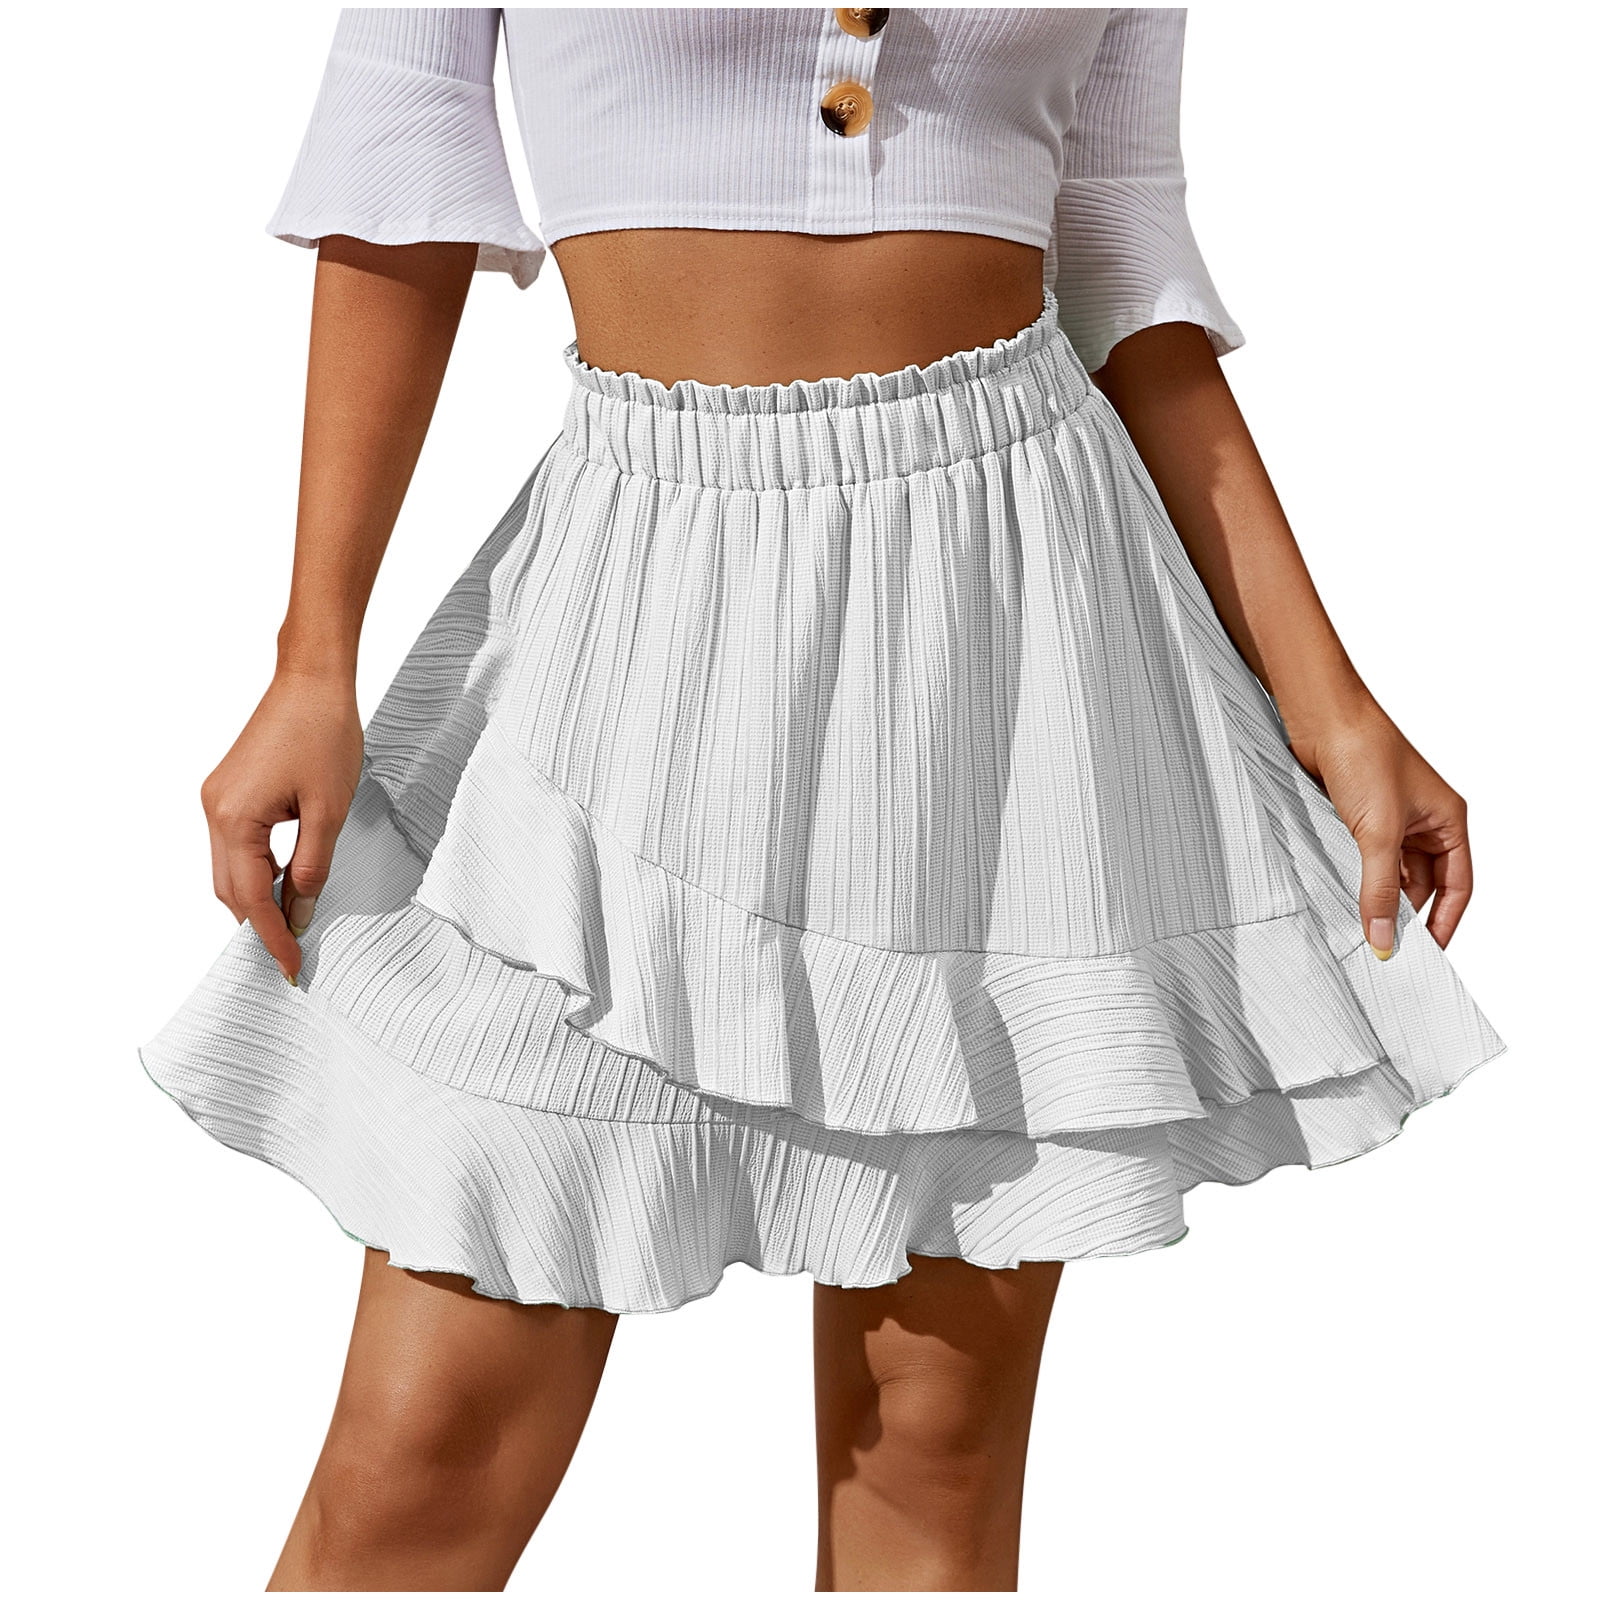 Women's Summer Empire Waist Ruffle Tiered Mini Skirt Floral Printed A Line  Beach Cute Skirt Grey : Clothing, Shoes & Jewelry 